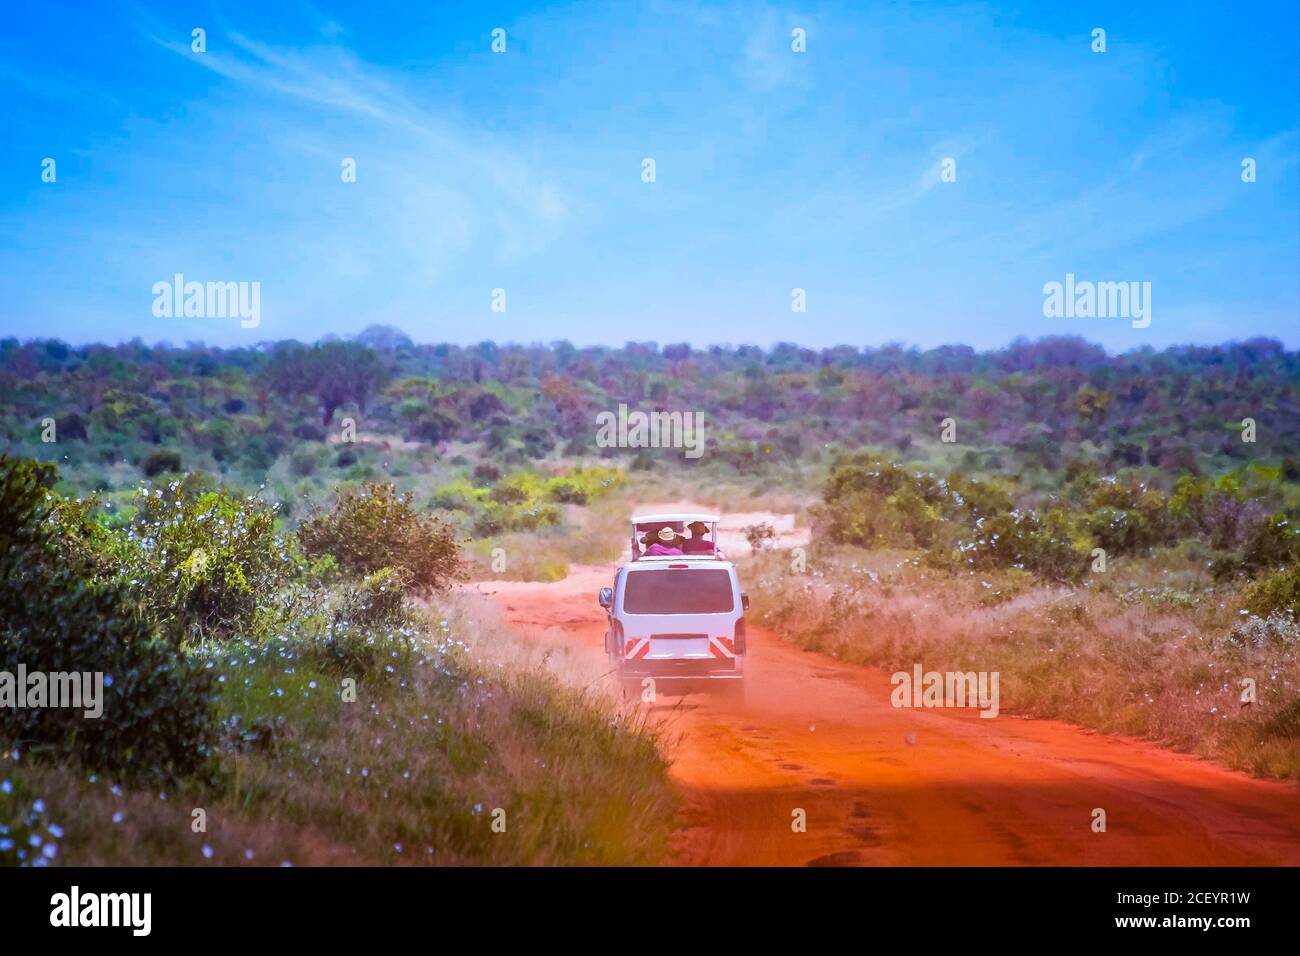 The car is driving on a dirt road in Tsavo National Park East Kenya. People are on a safari trip in nature. Stock Photo